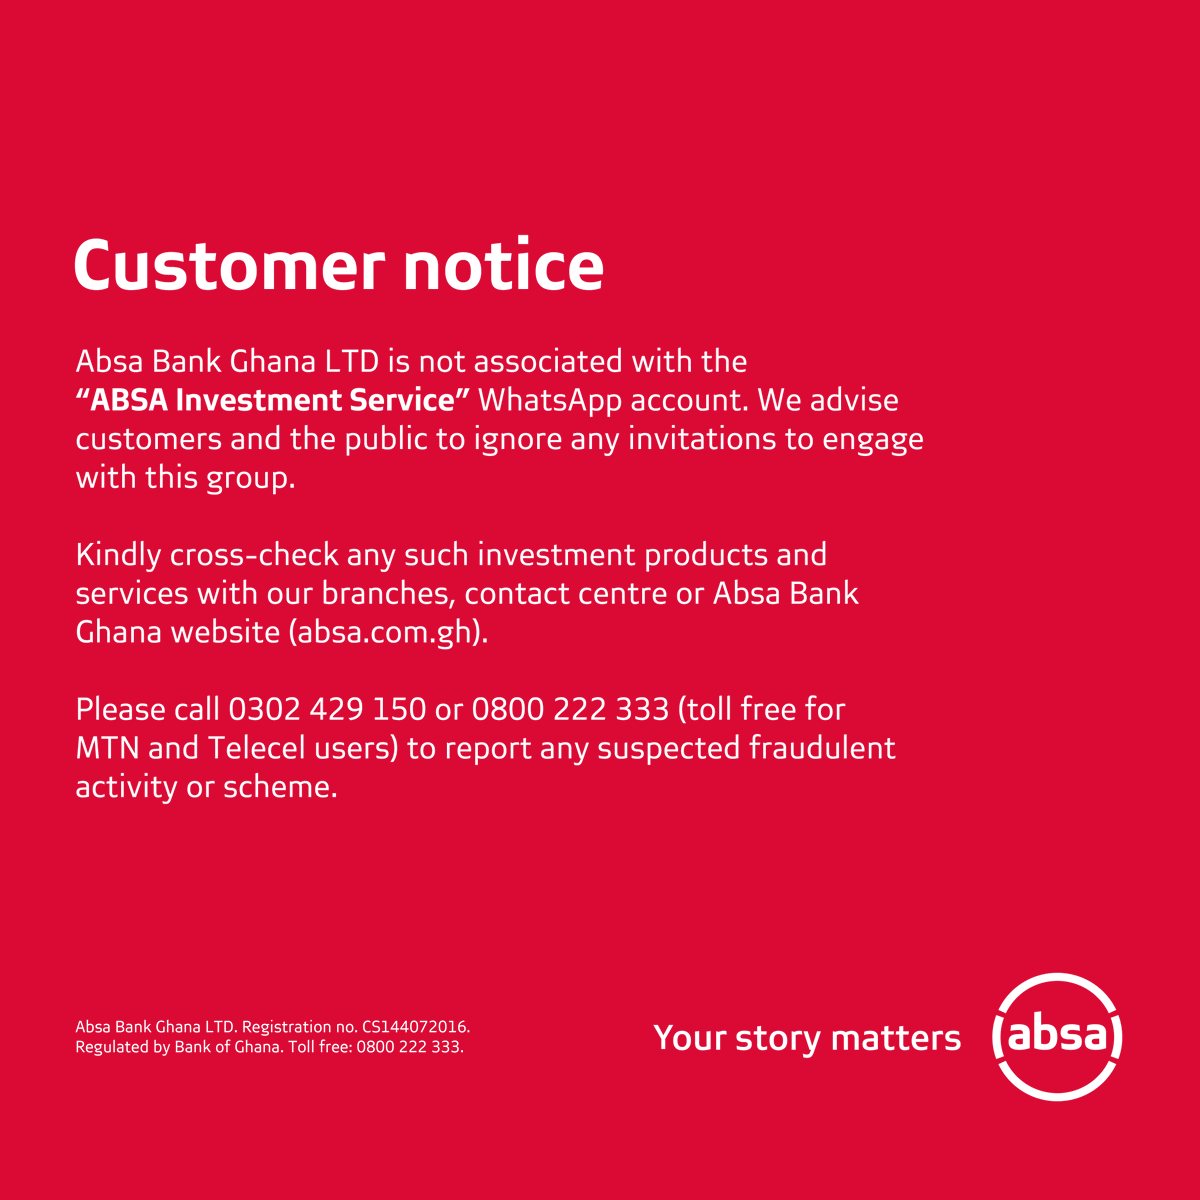 Attention valued Absa customers. For genuine Absa investment products, always refer to our official platforms. Please stay alert, stay safe, and protect yourself from fraud.  

#YourStoryMatters #AbsaGhana